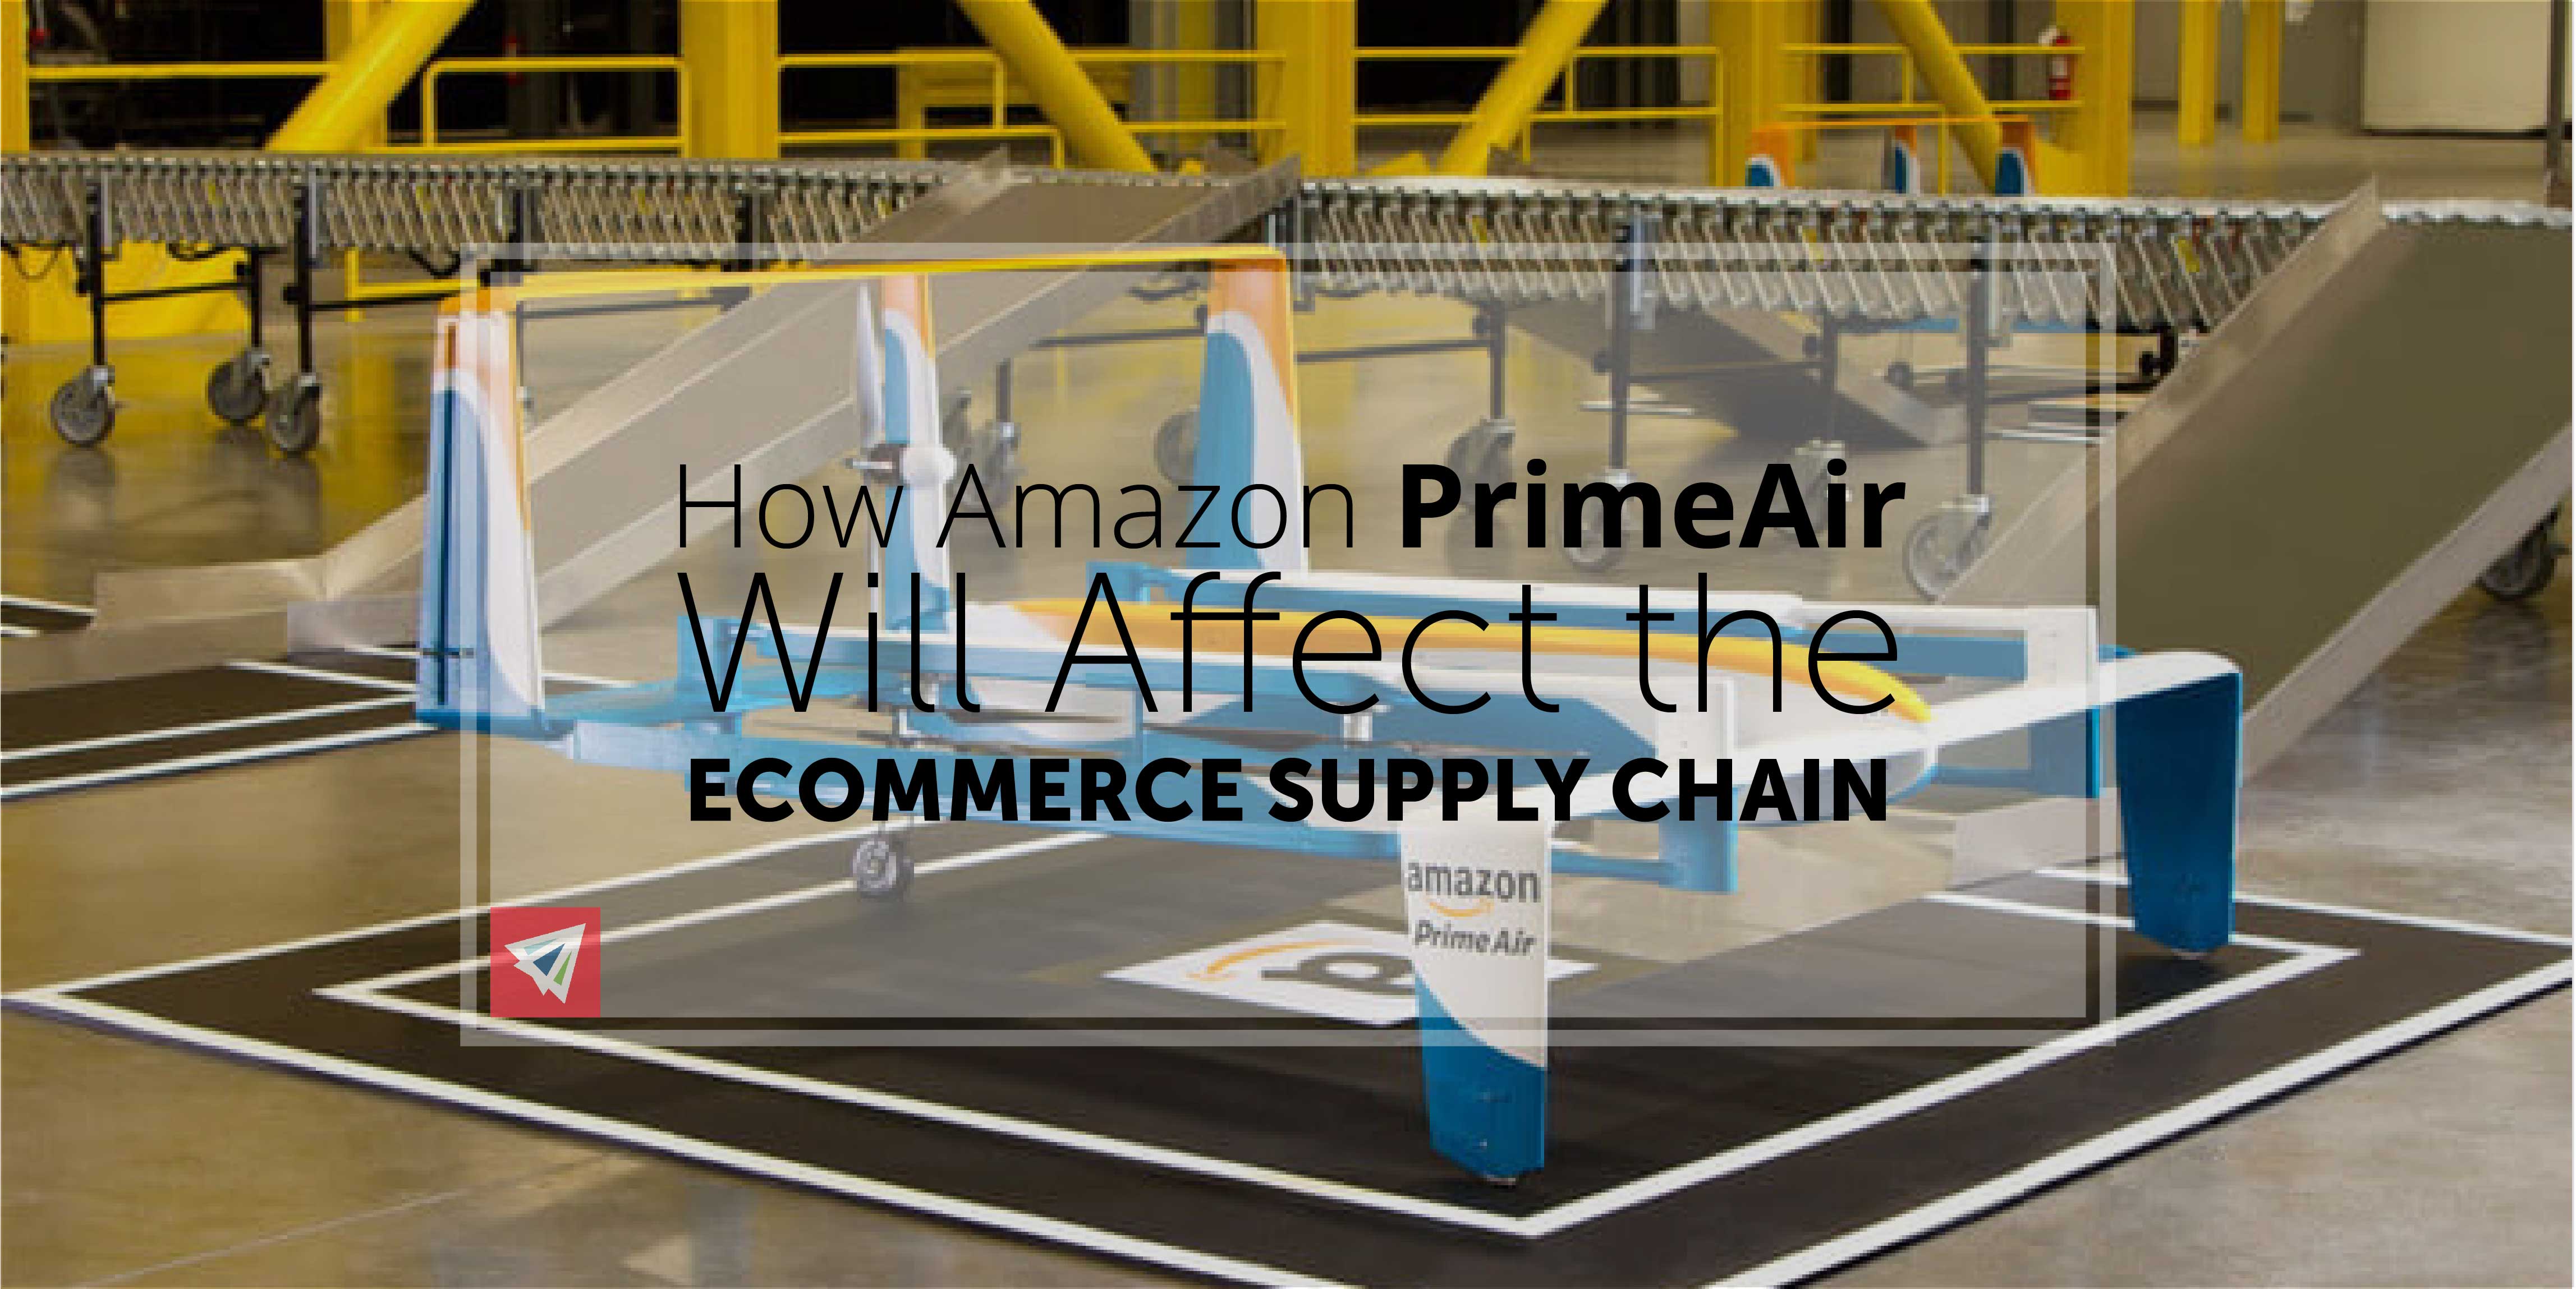 How Amazon PrimeAir Will Affect the eCommerce Supply Chain